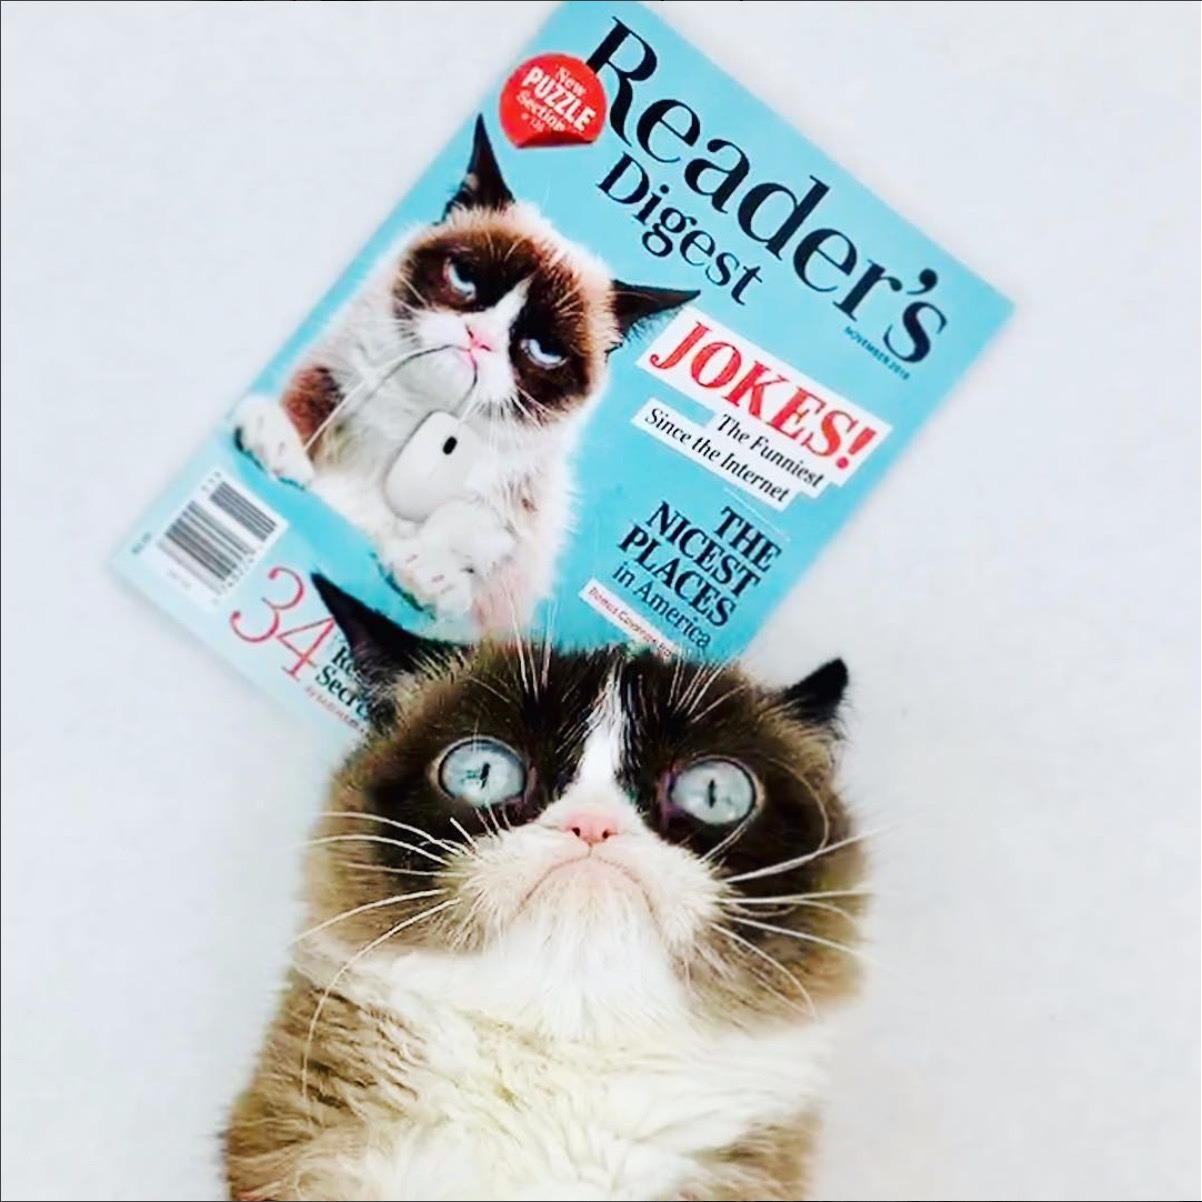 Grumpy Cat is on the November cover of @readersdigest!
Get your copy today! Or don’t.